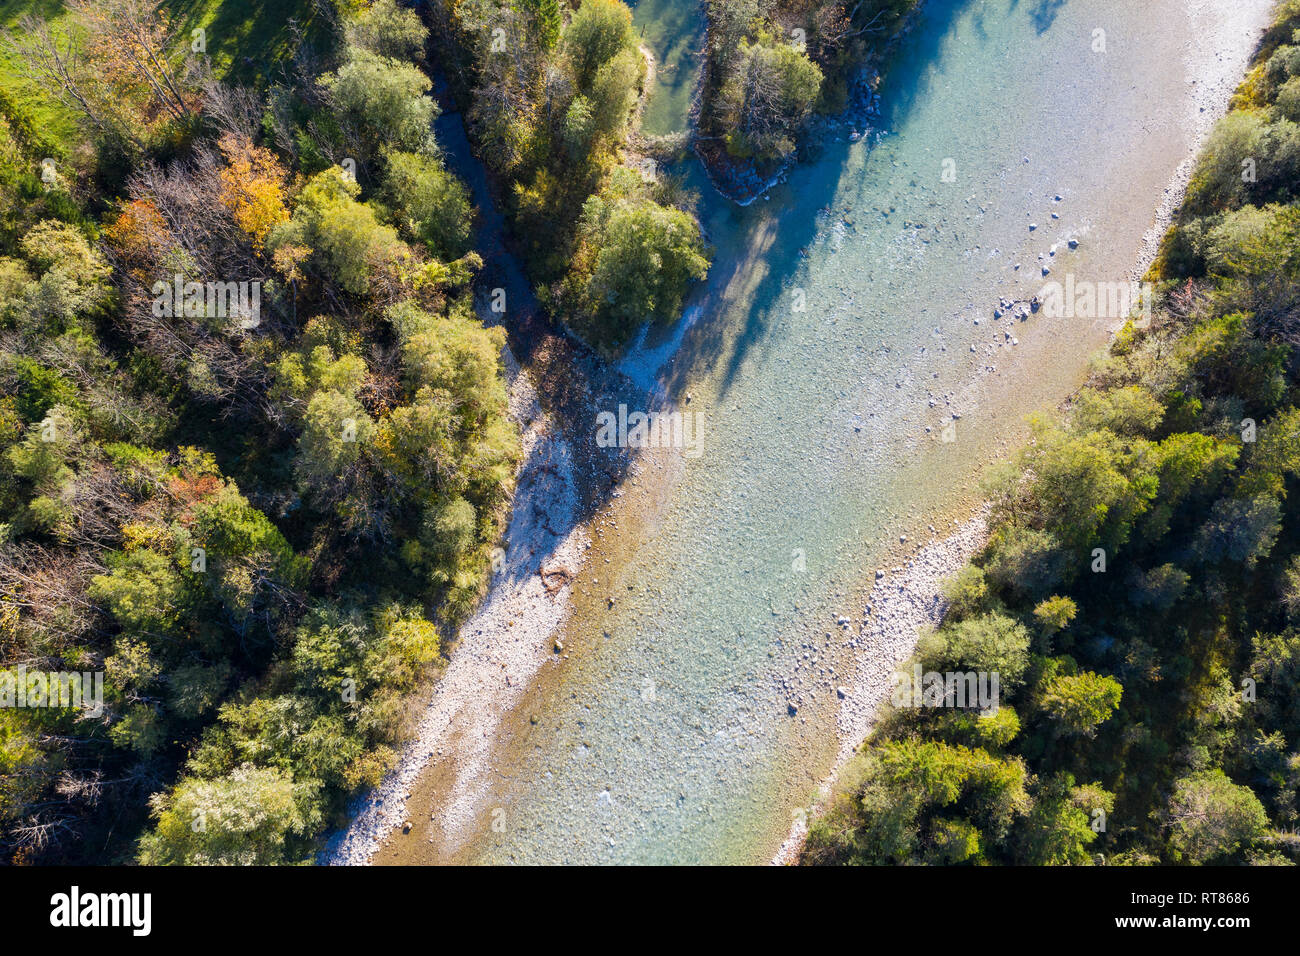 Germany, Upper Bavaria, Aerial view of Isar river near Lenggries Stock Photo